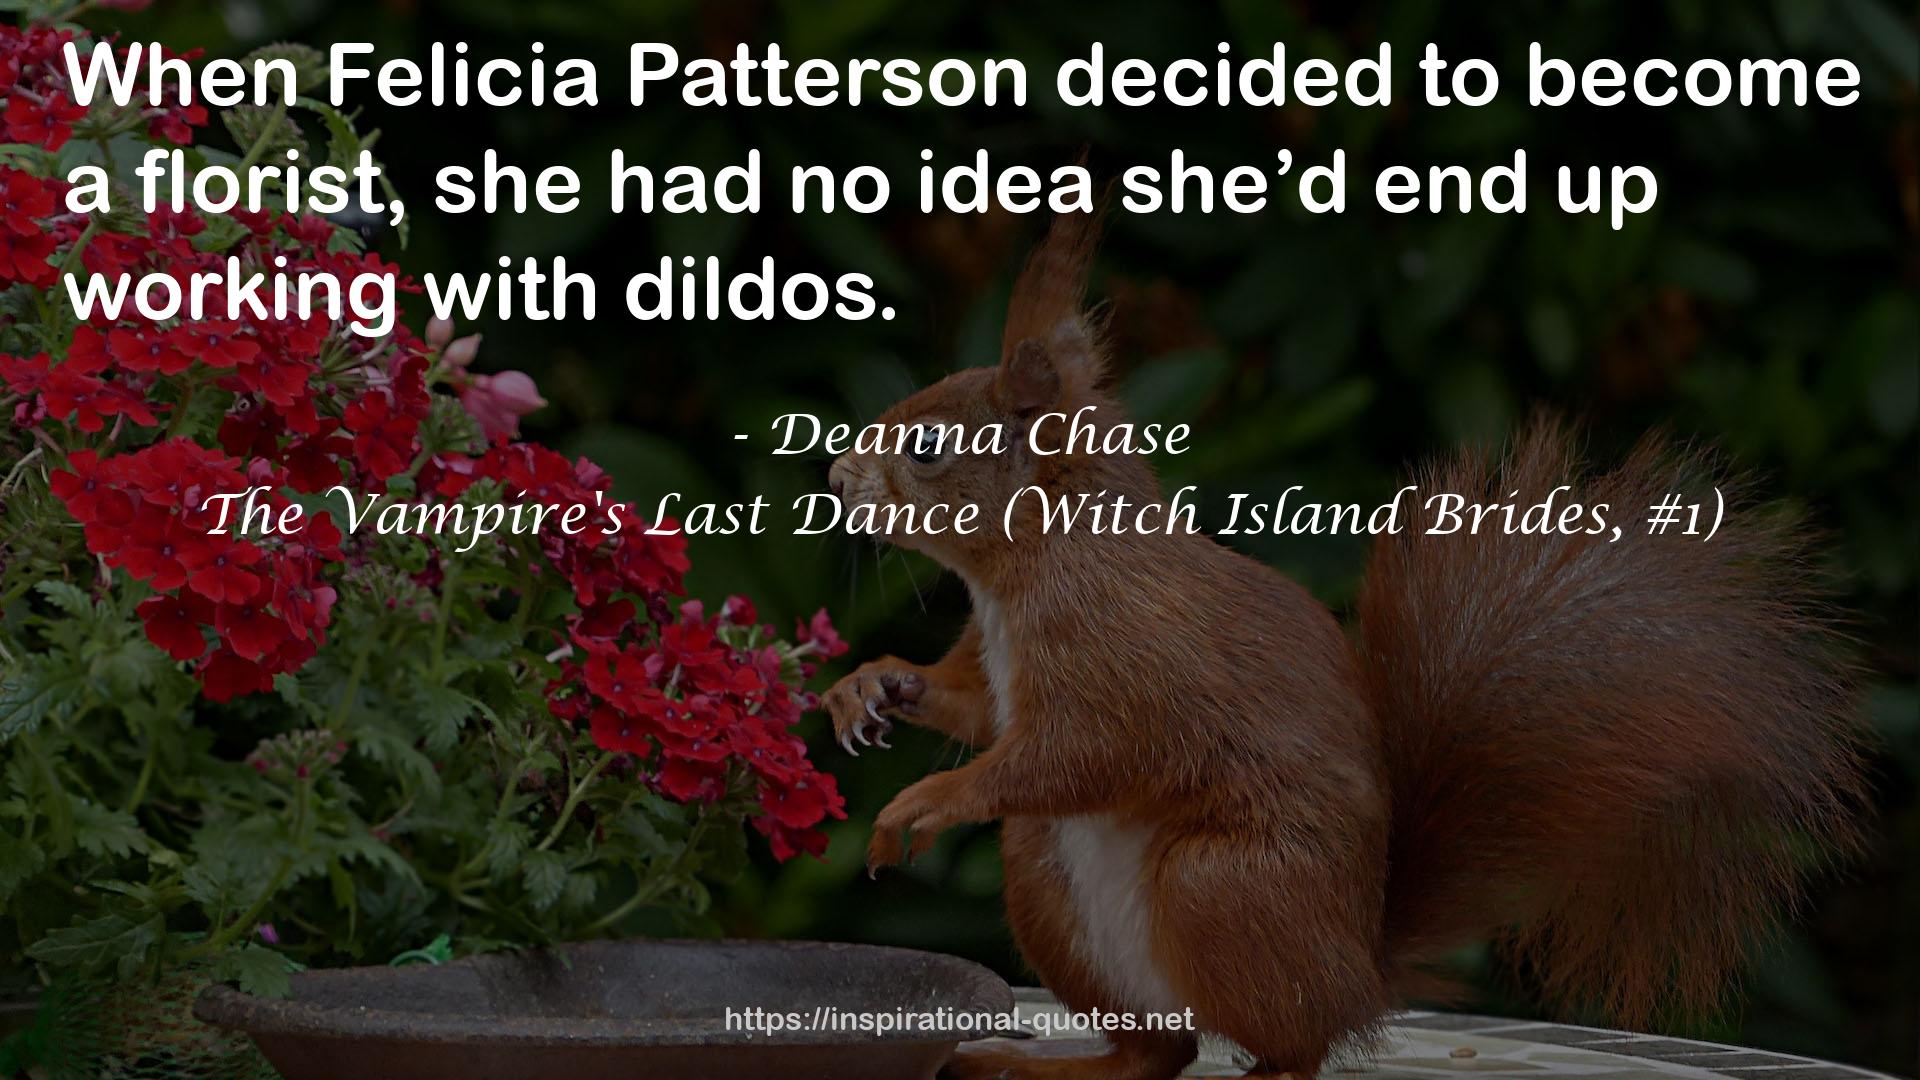 The Vampire's Last Dance (Witch Island Brides, #1) QUOTES